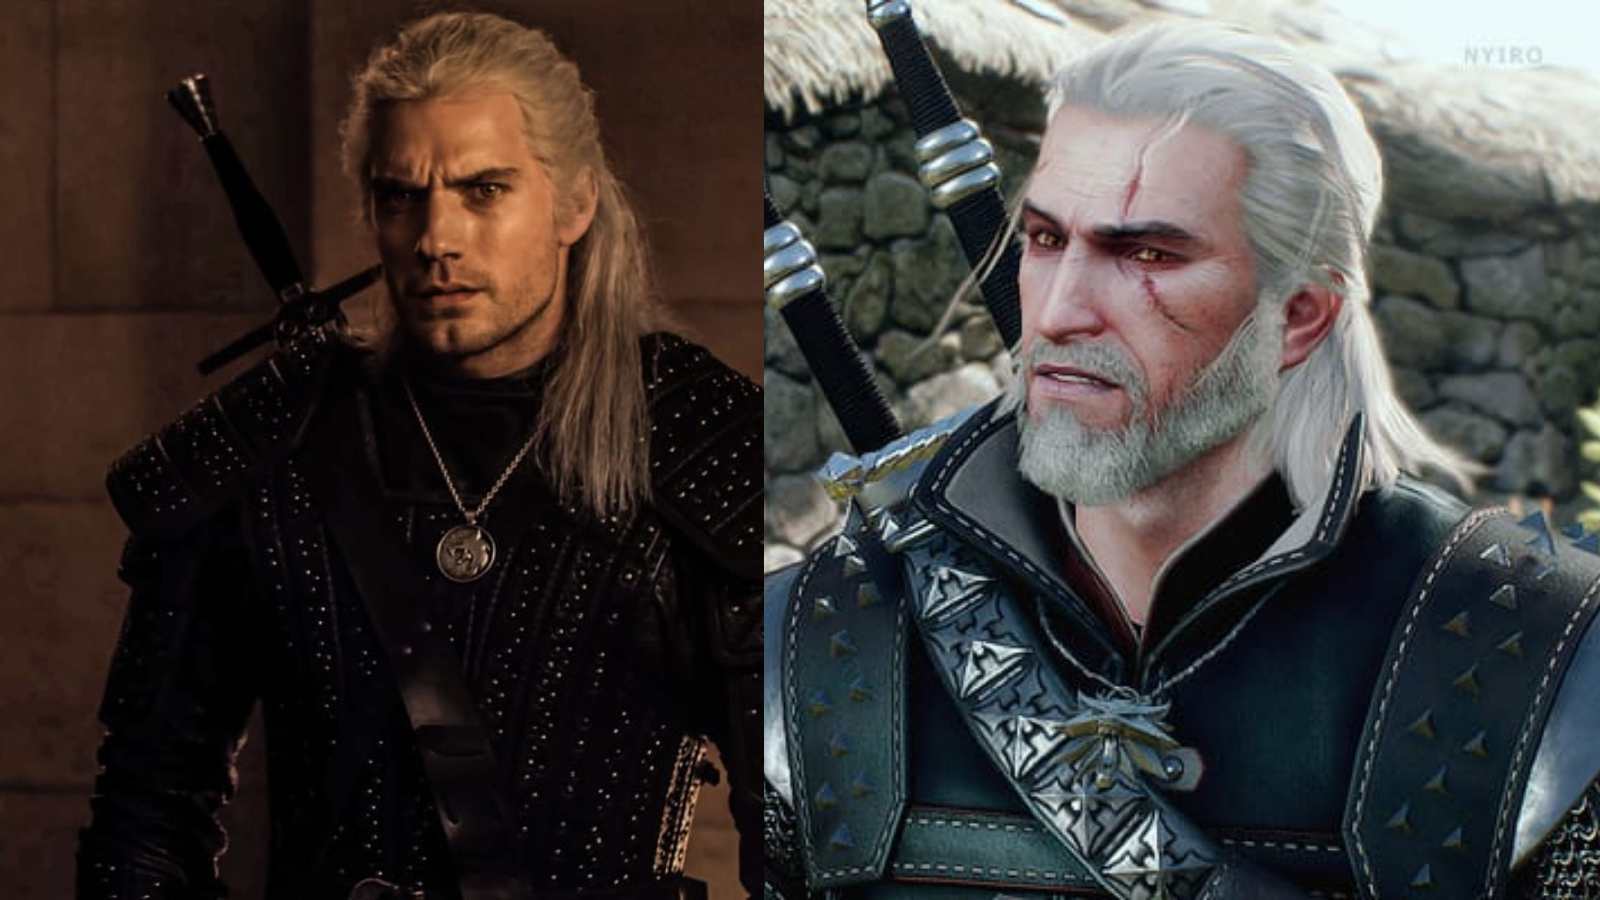 Cavill as Geralt of Rivia and his gaming parallel